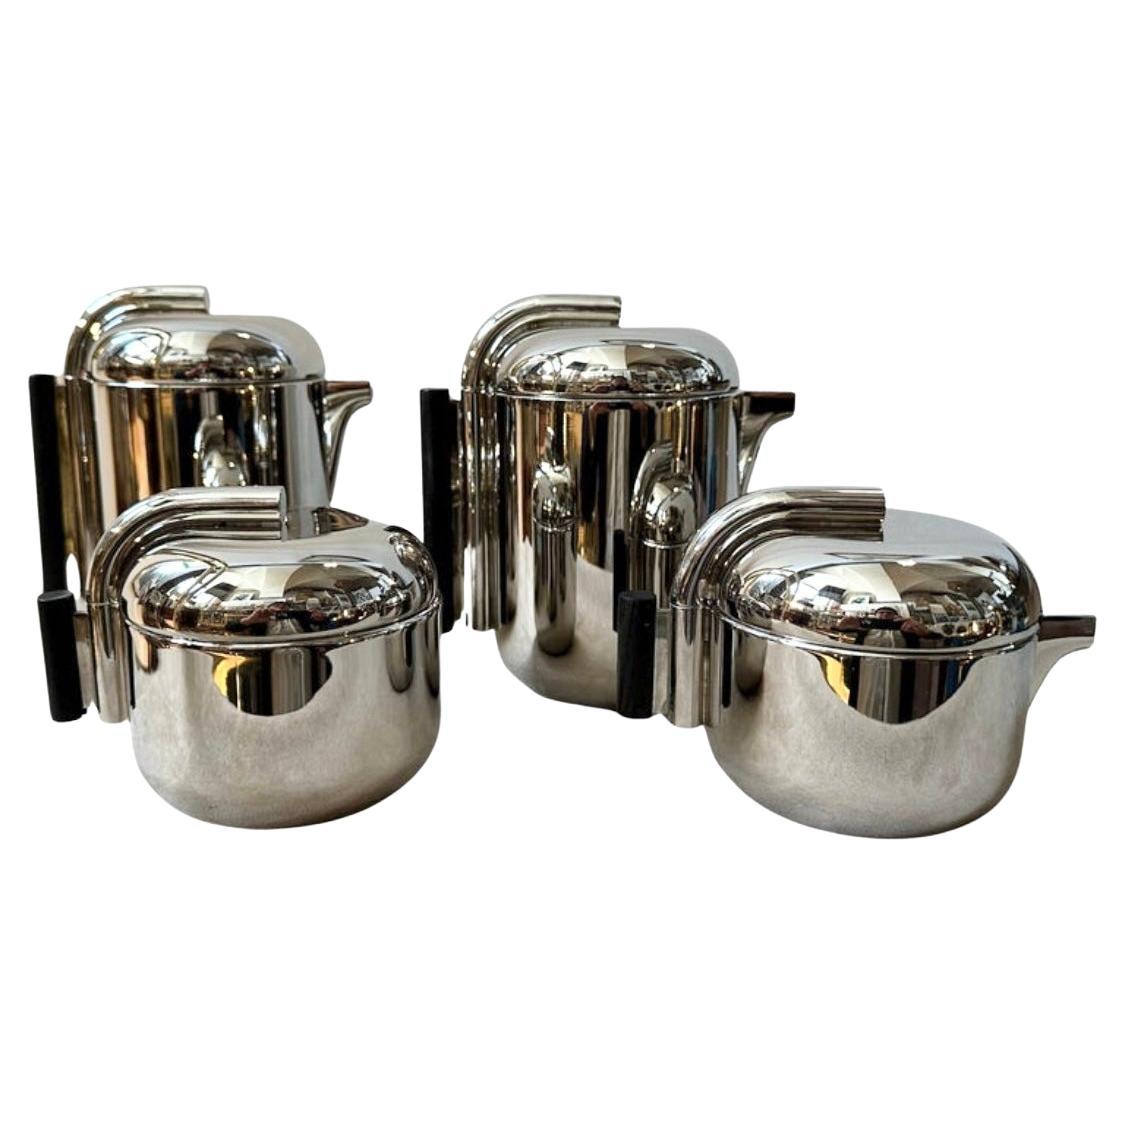 1960s Silver Plated Tea and Coffee Set Designed by G. Coarezza for Mam Milano For Sale